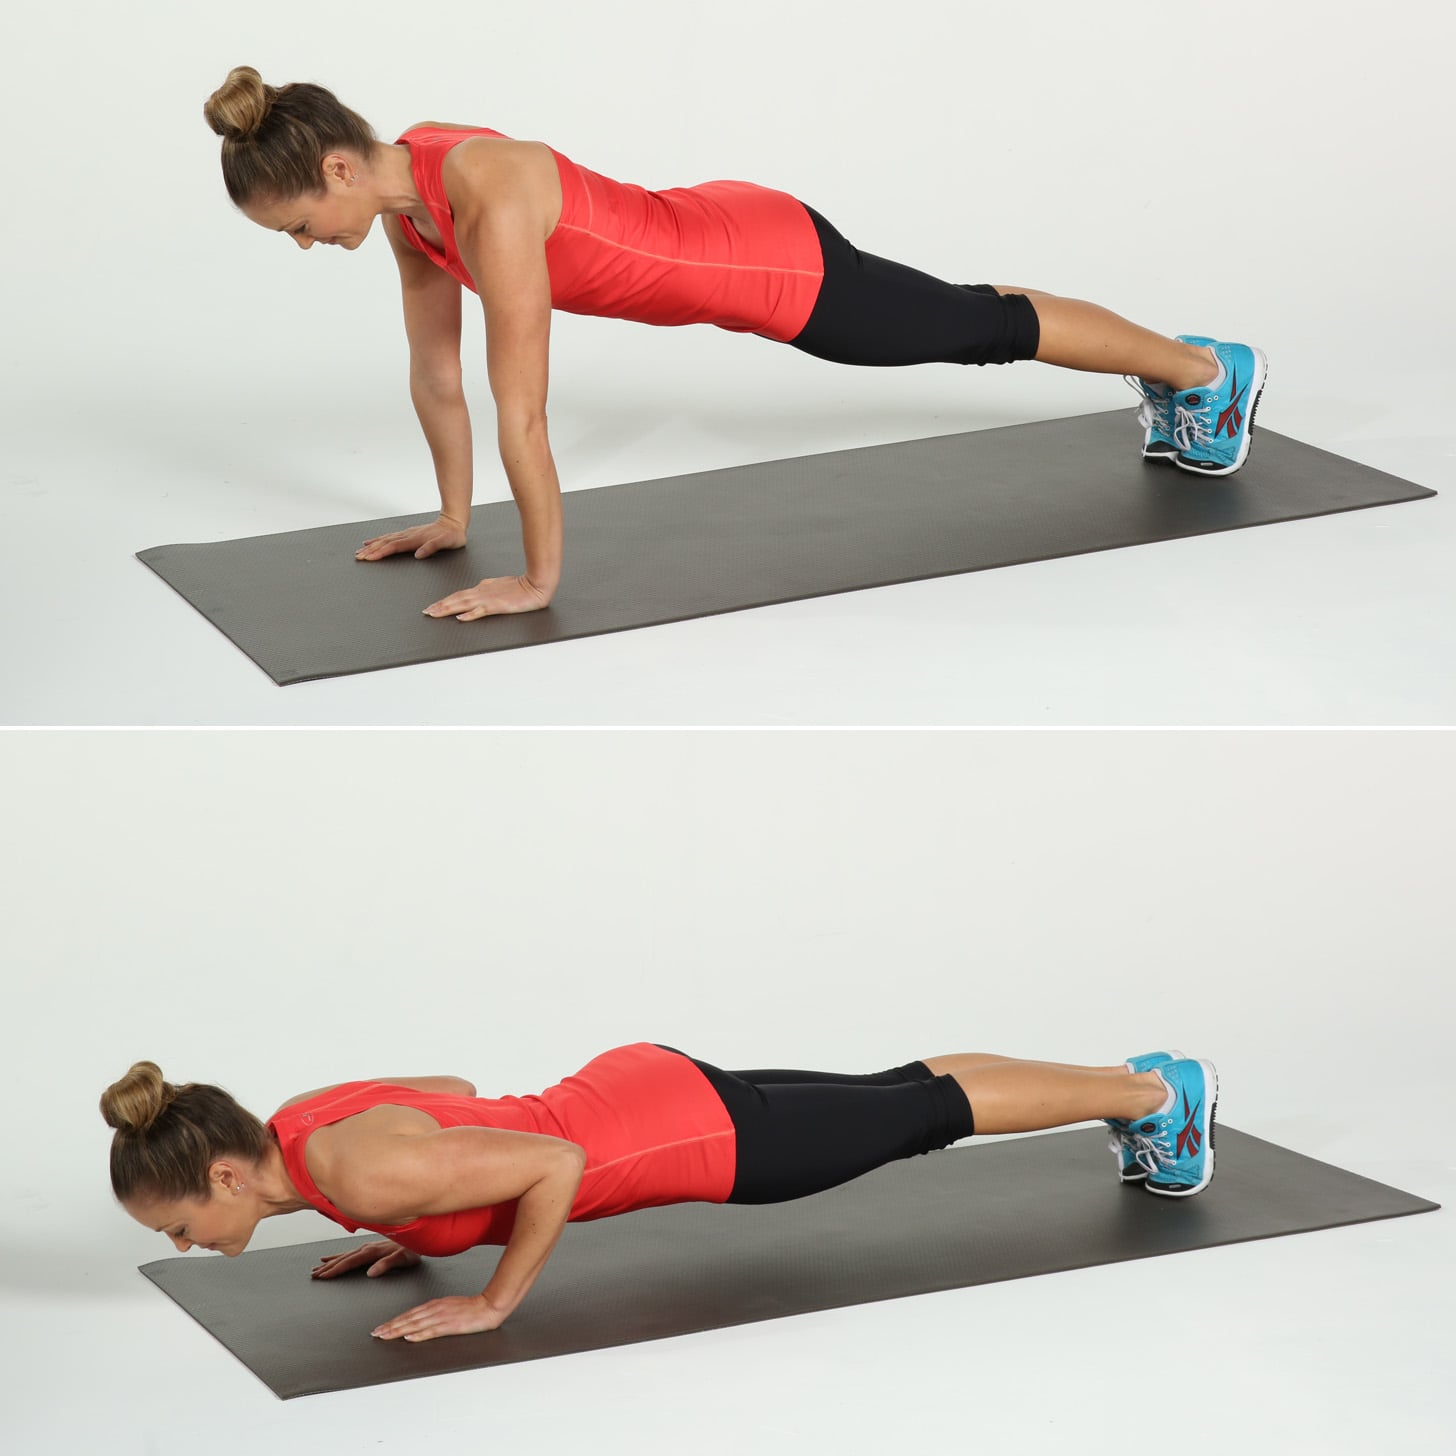 Bodyweight Exercises For Strong Arms Popsugar Fitness